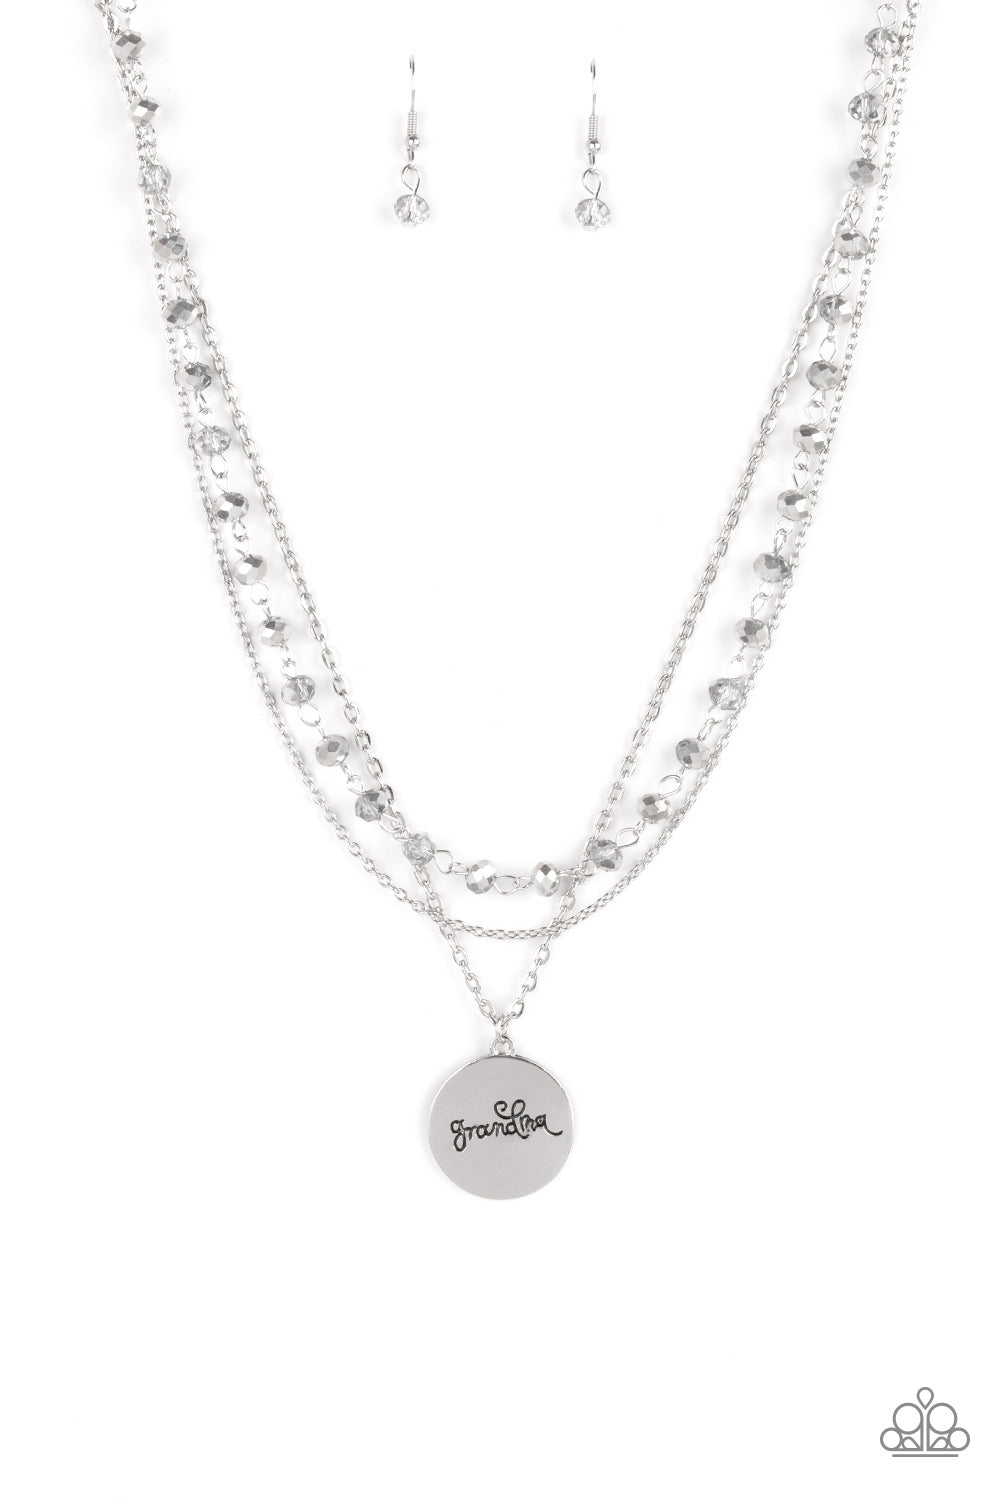 Promoted to Grandma - silver - Paparazzi necklace